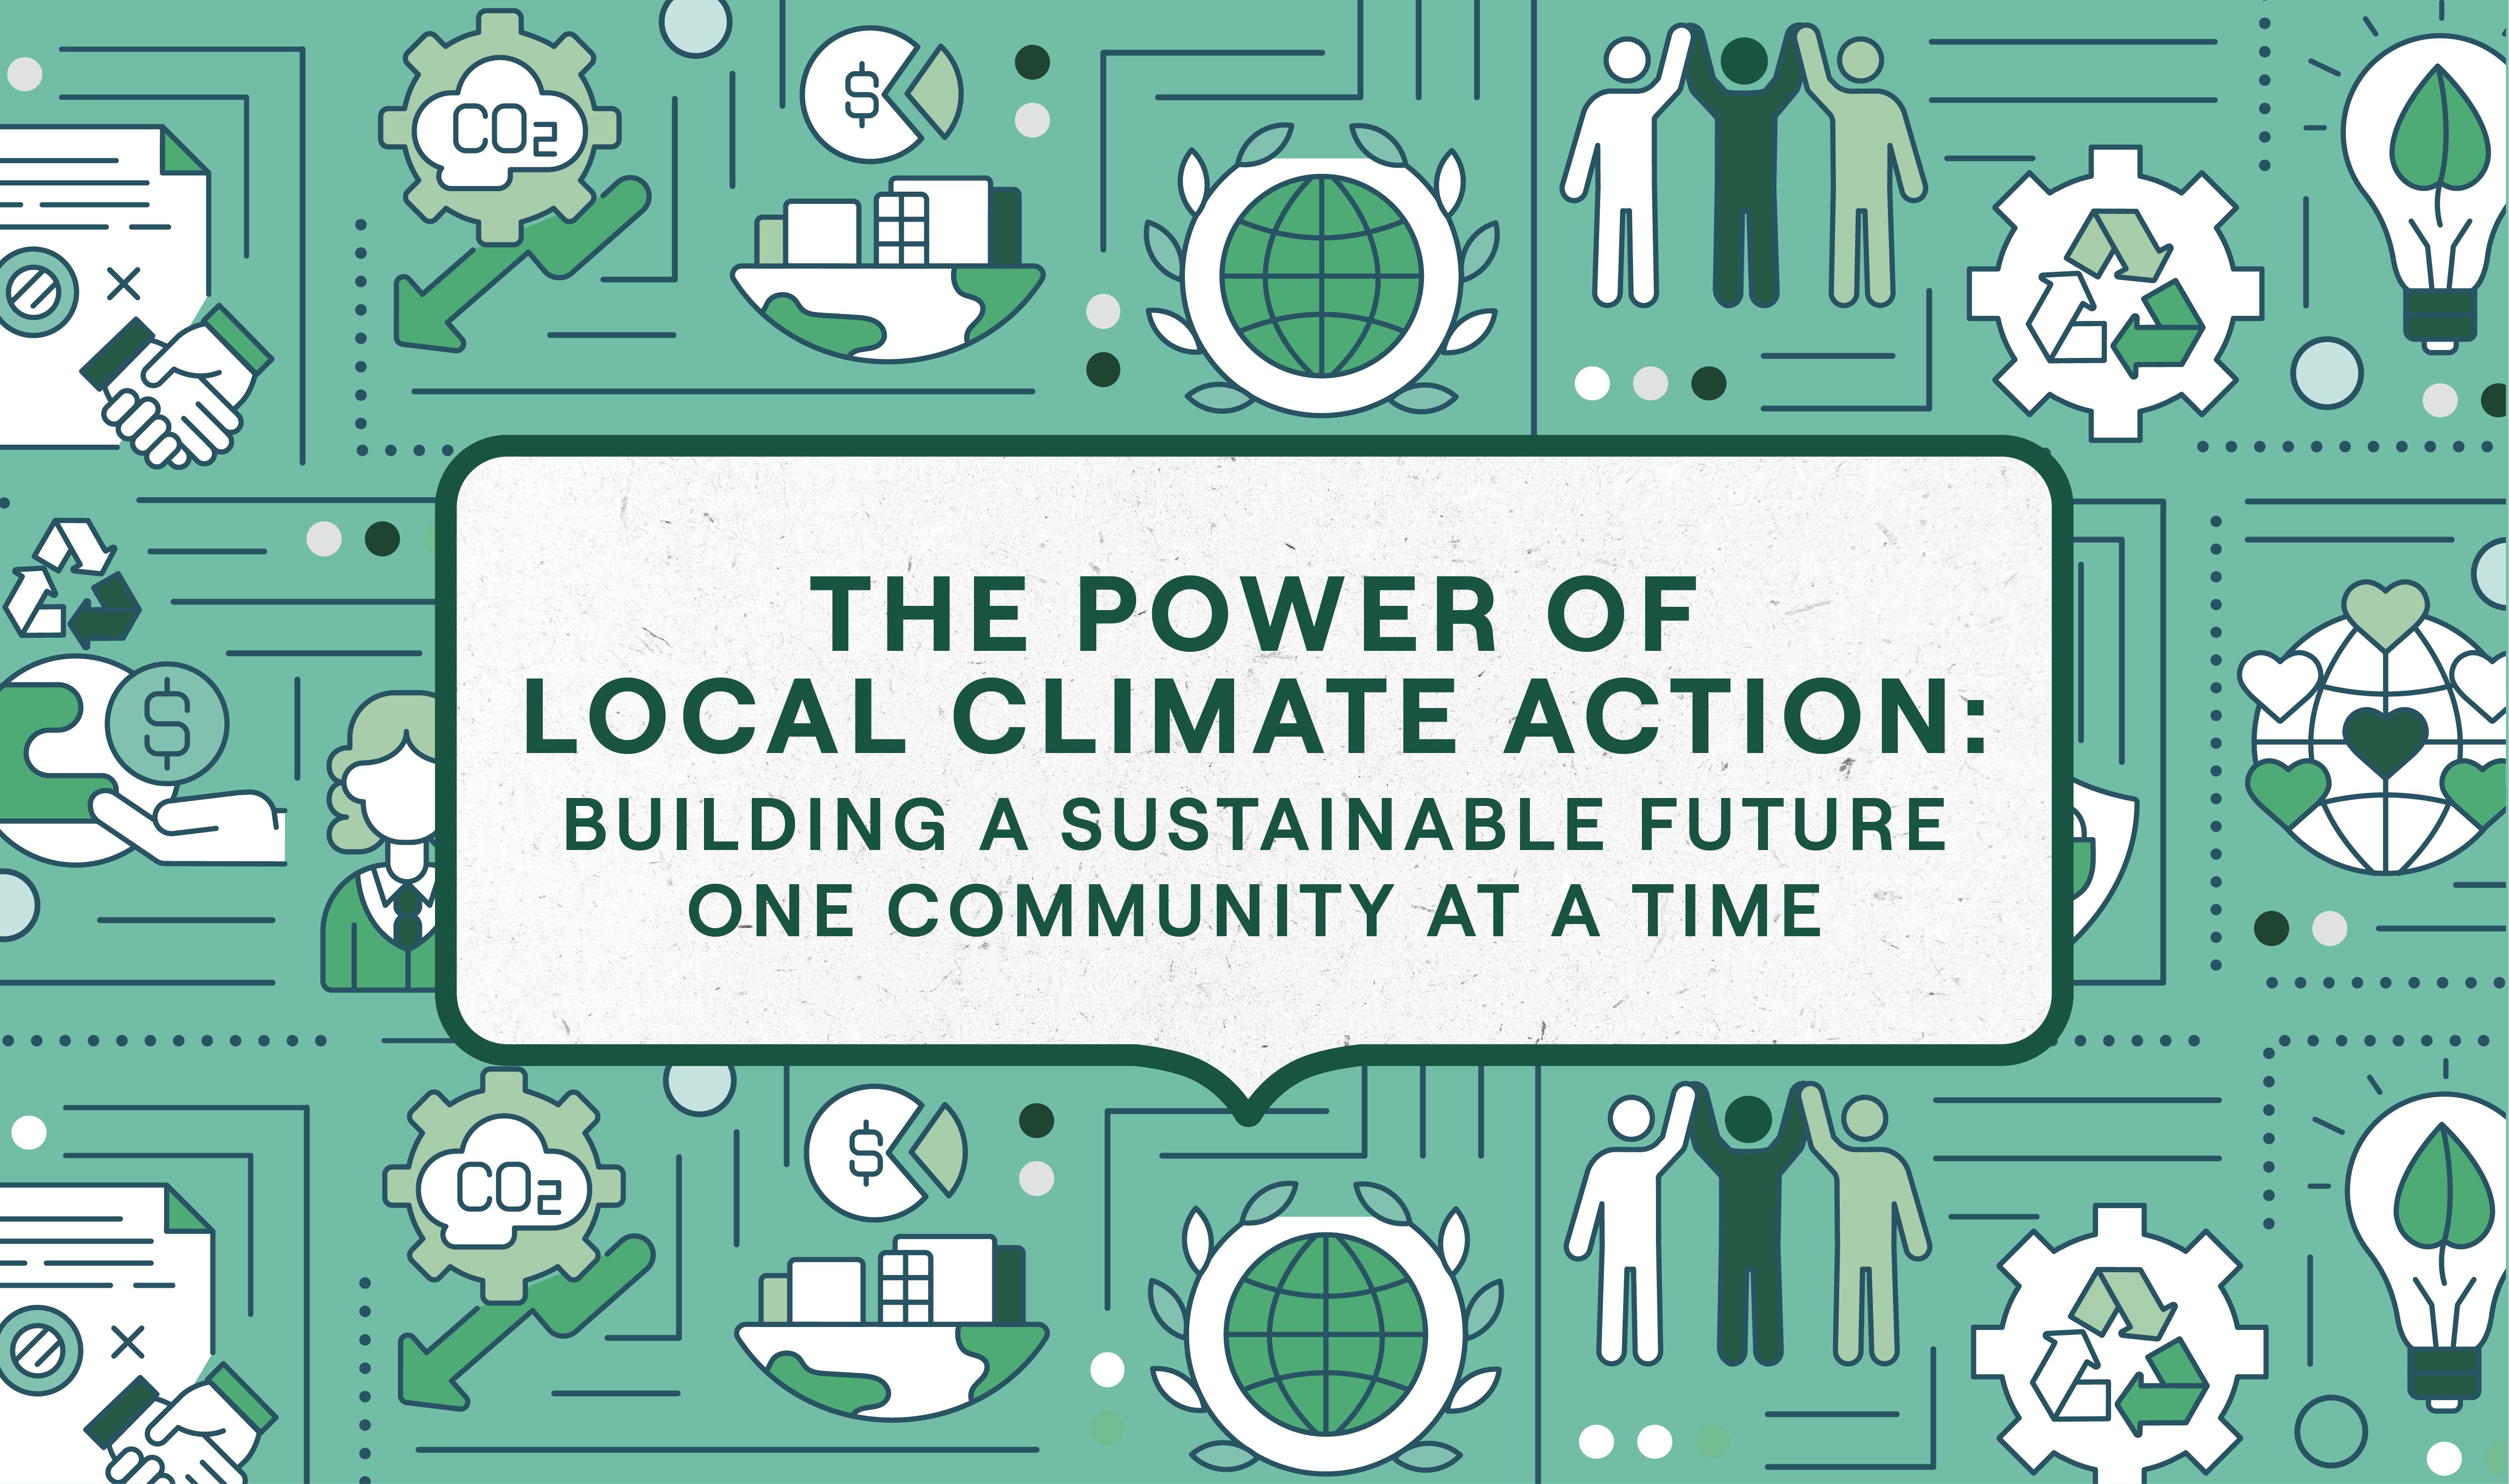 The Power of Local Climate Action: Building a sustainable future one community at a time.